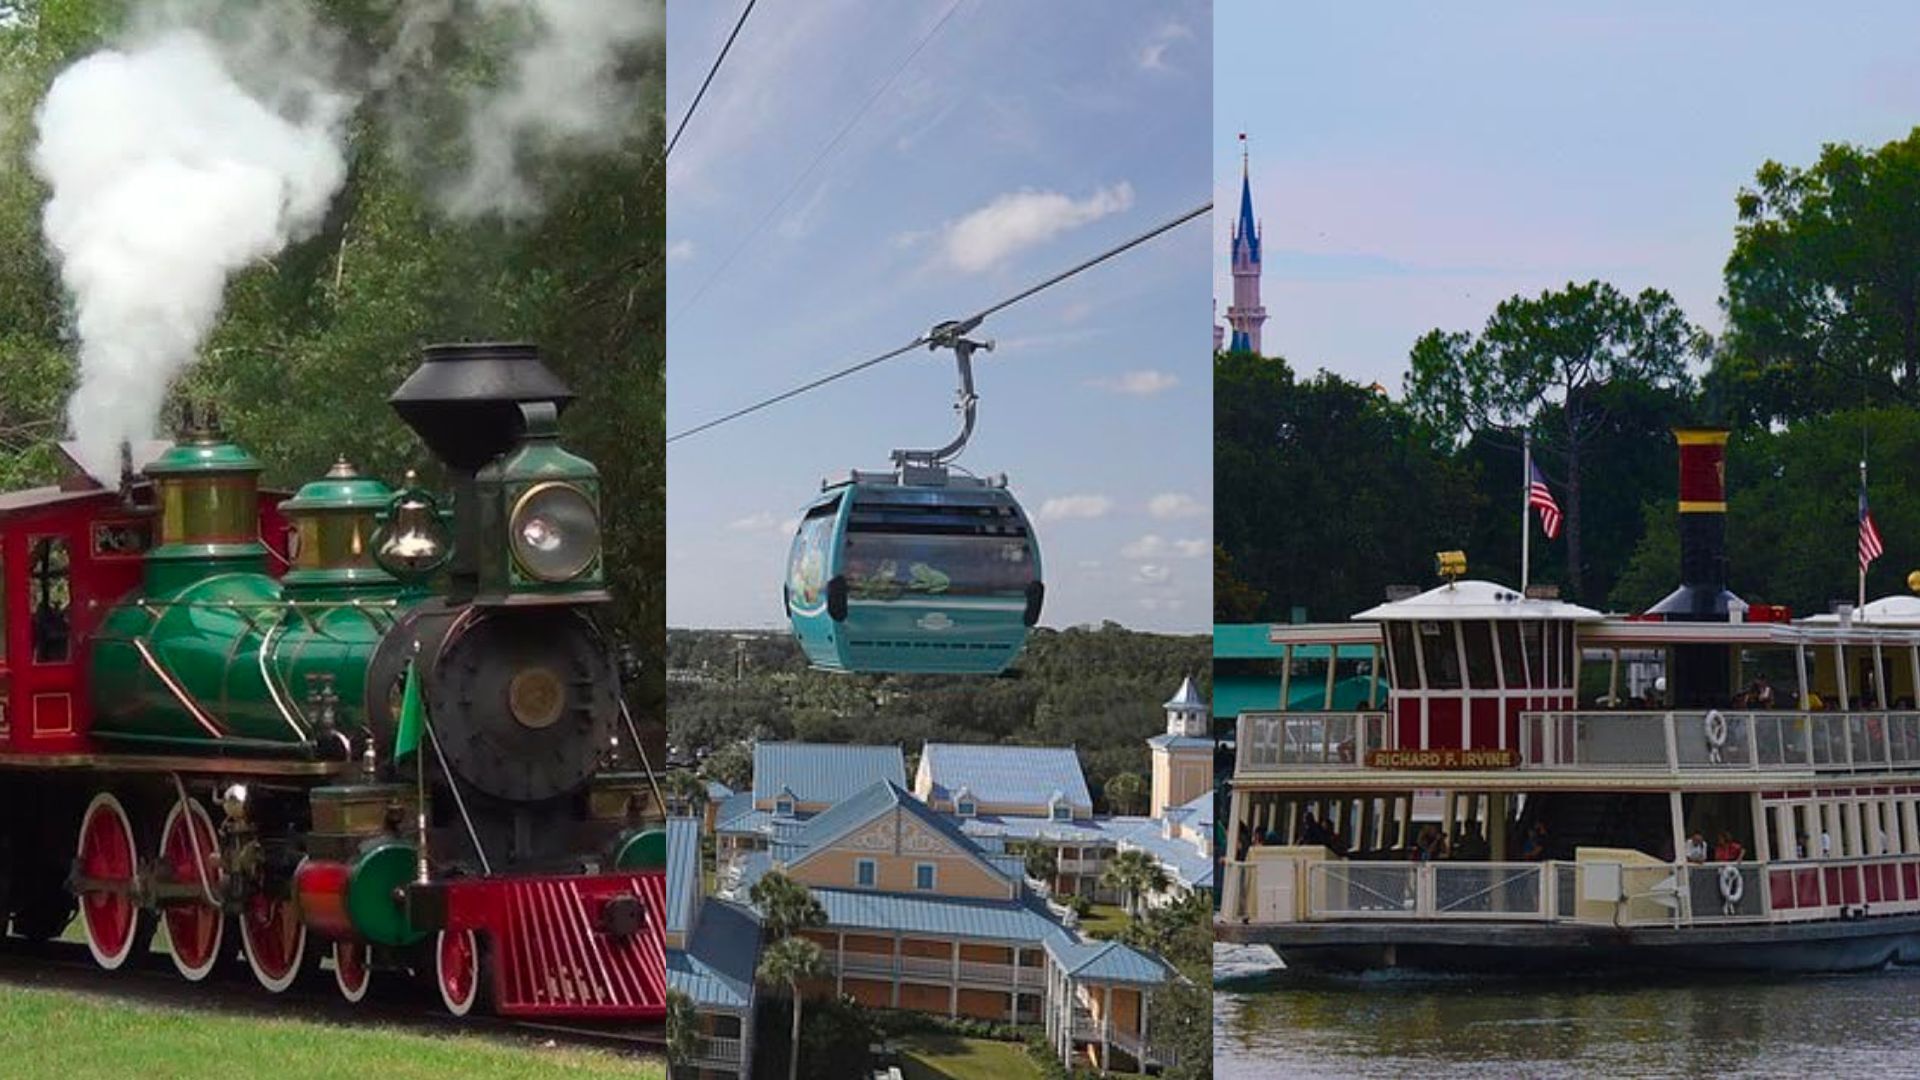 The transport options in Disney World are seriously next level